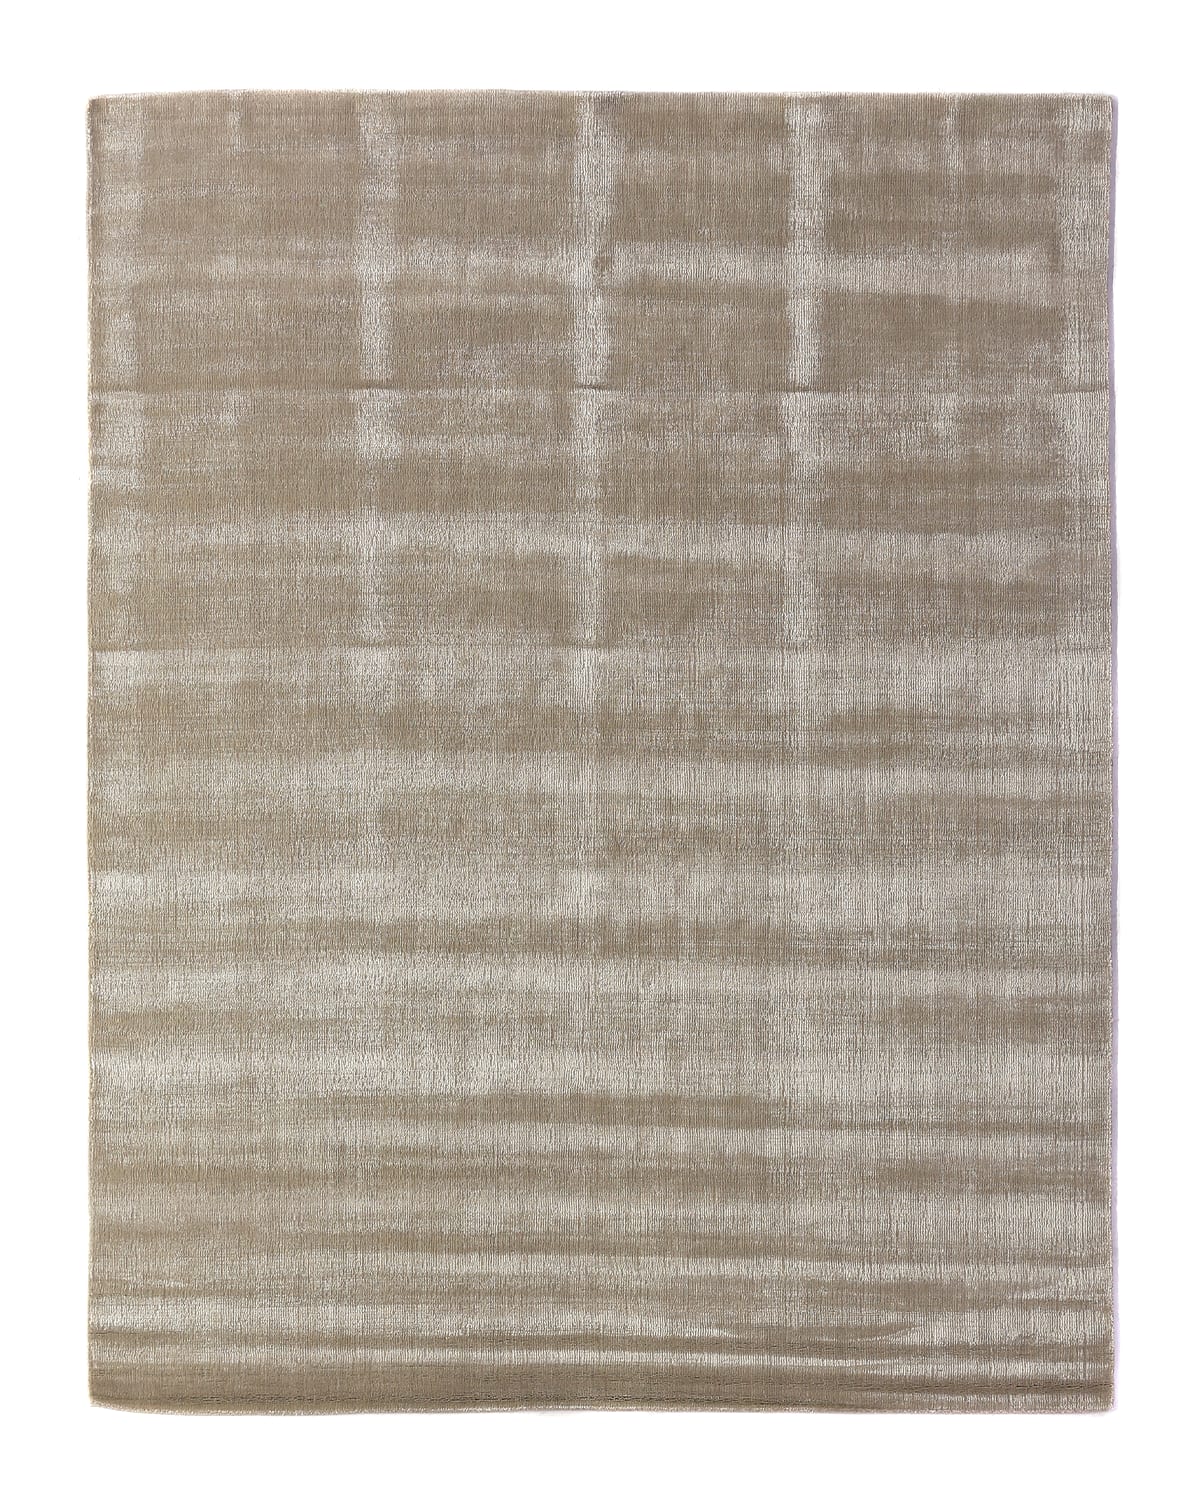 Exquisite Rugs Gwendolyn Rug, 6' X 9' In Neutral